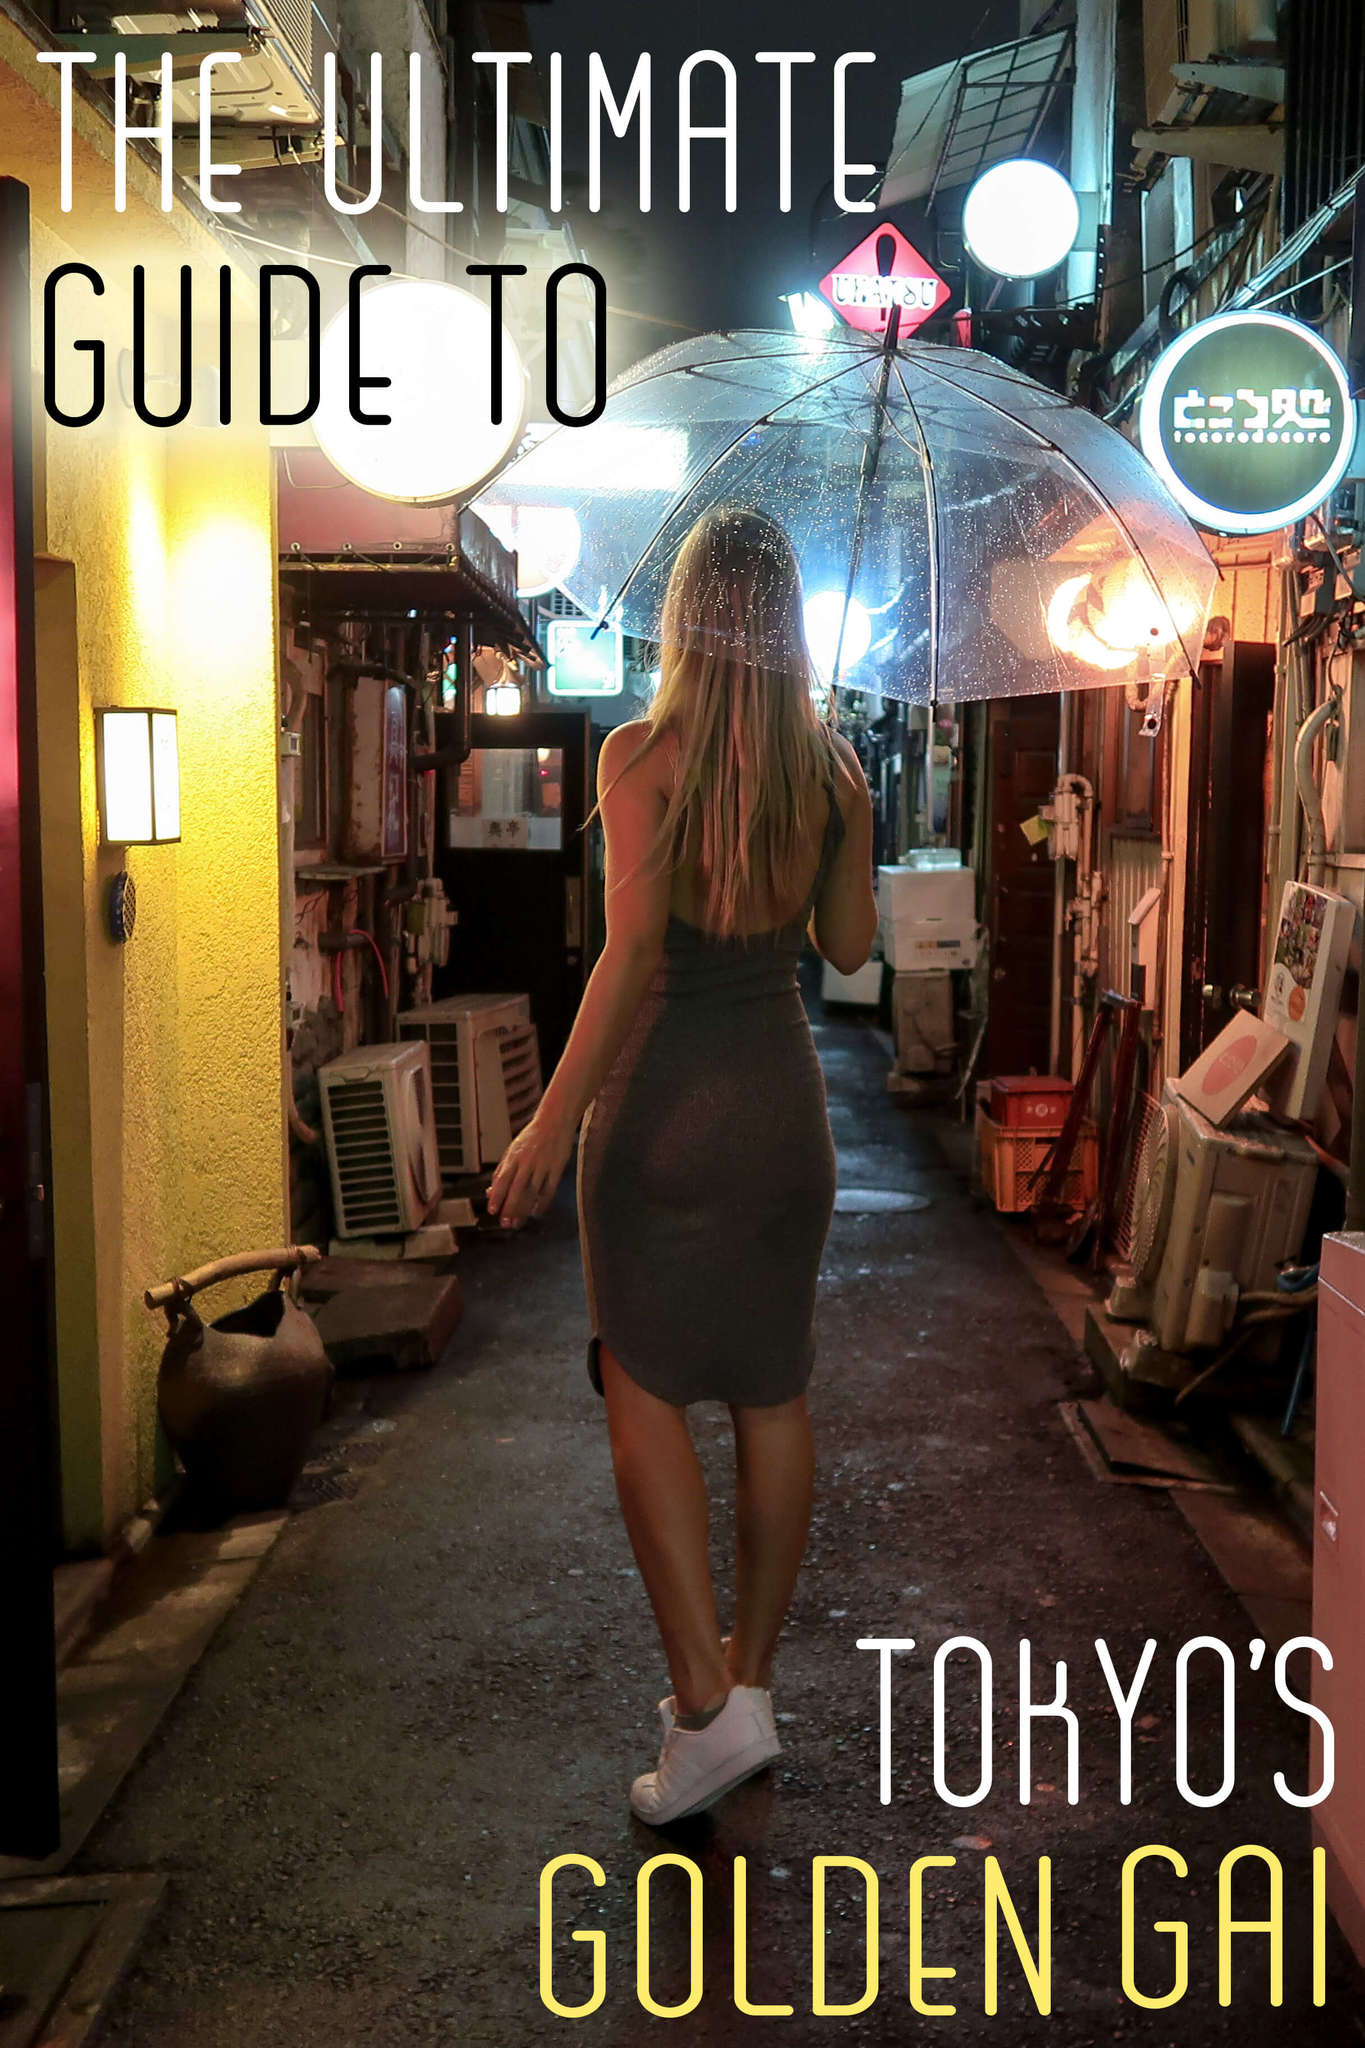 The-ultimate-guide-to-tokyo's-golden-gai